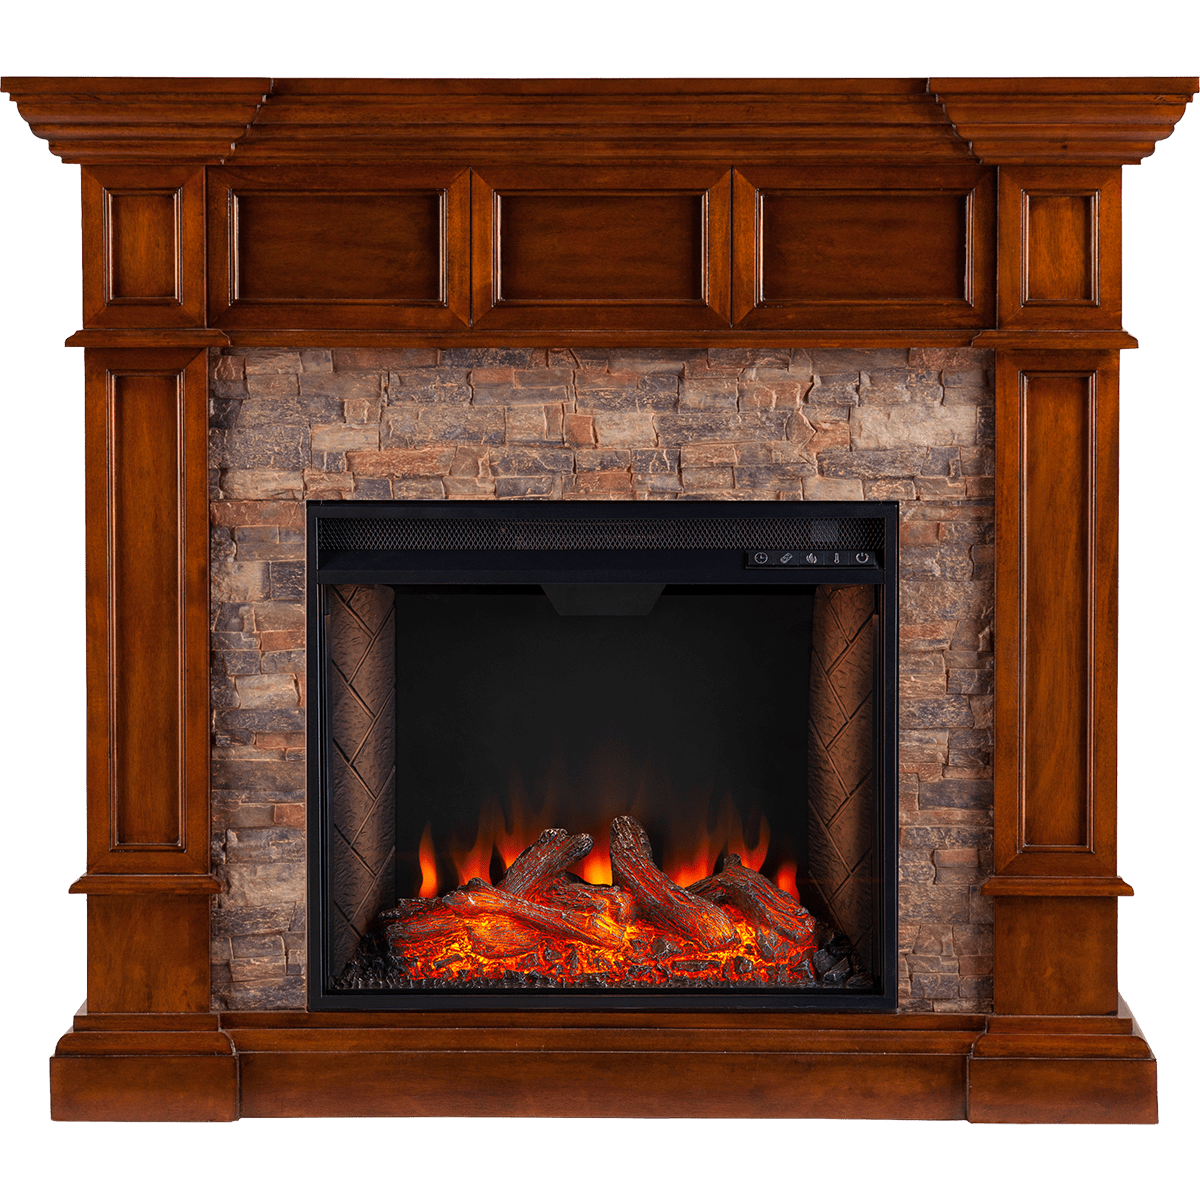 Amazon Electric Fireplace Tv Stand Beautiful southern Enterprises Merrimack Simulated Stone Convertible Electric Fireplace